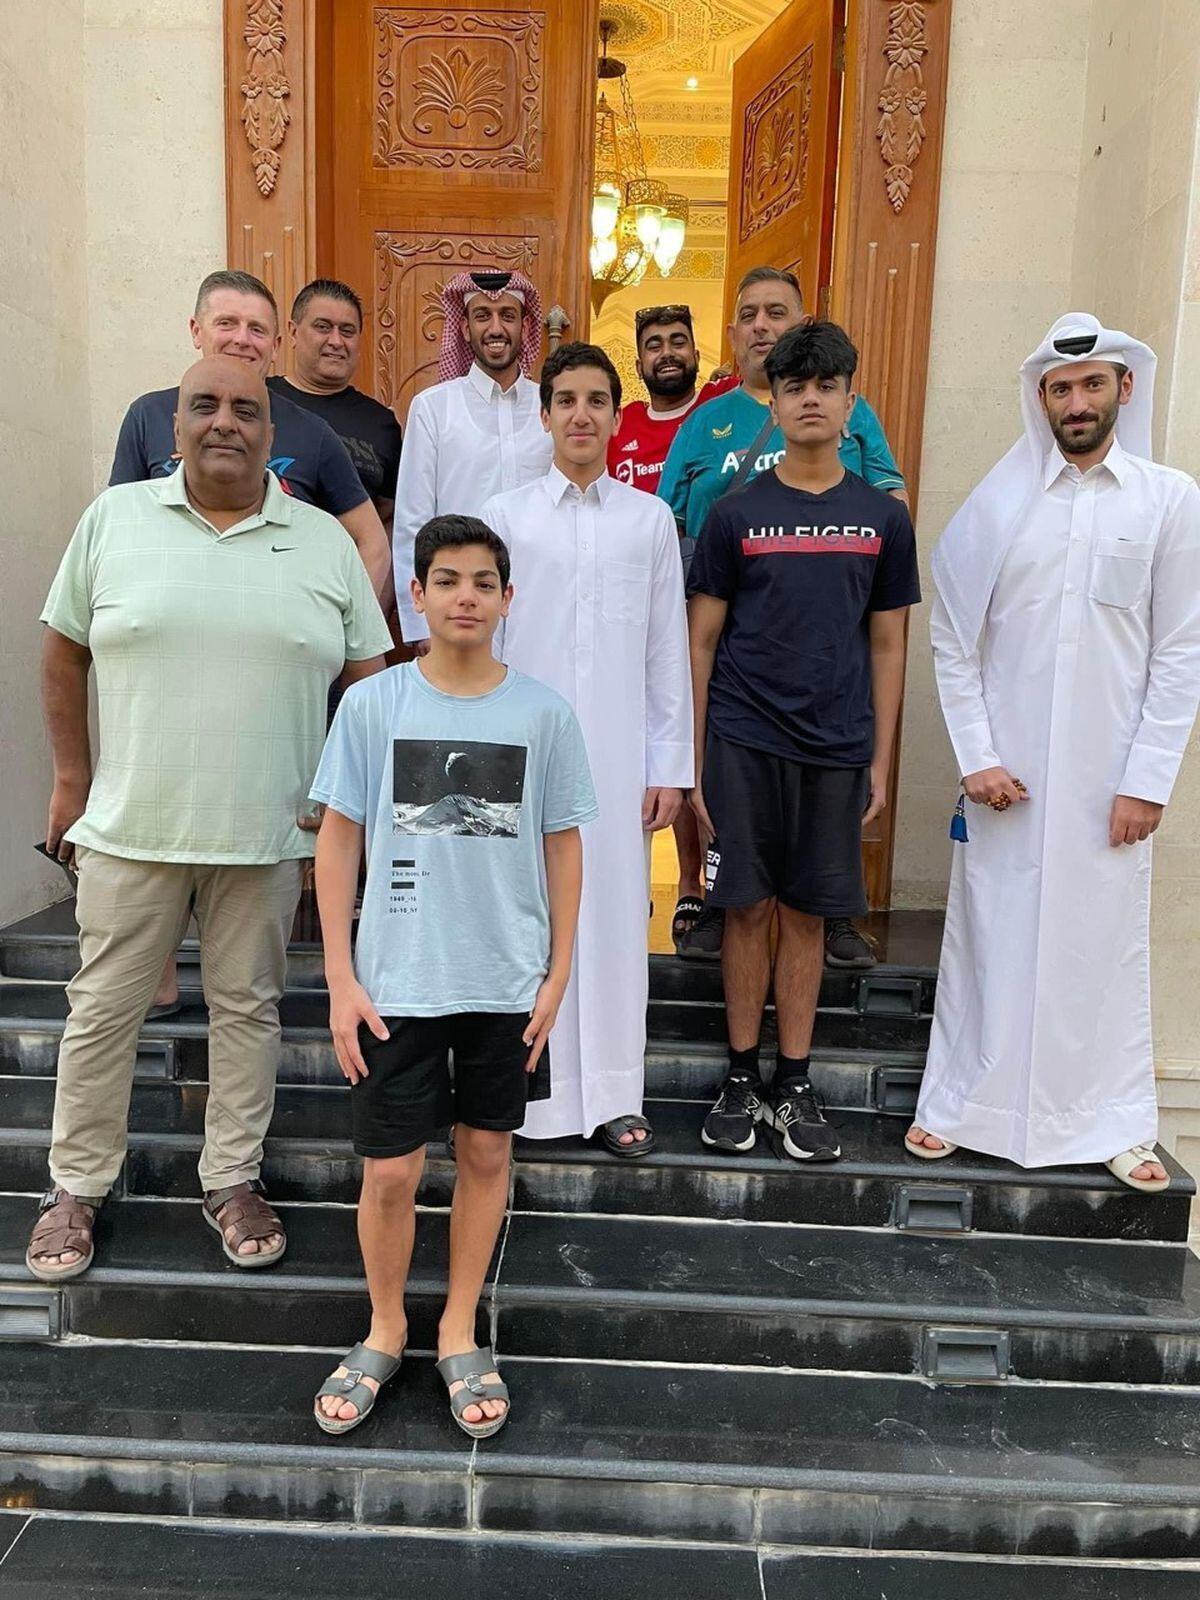 Jassa Dehal, Harjit Dheil, Kevin Briggs, Indi and Aran Dheil, outside the home of the Qatari resident who invited them to his house and showed fantastic hospitality